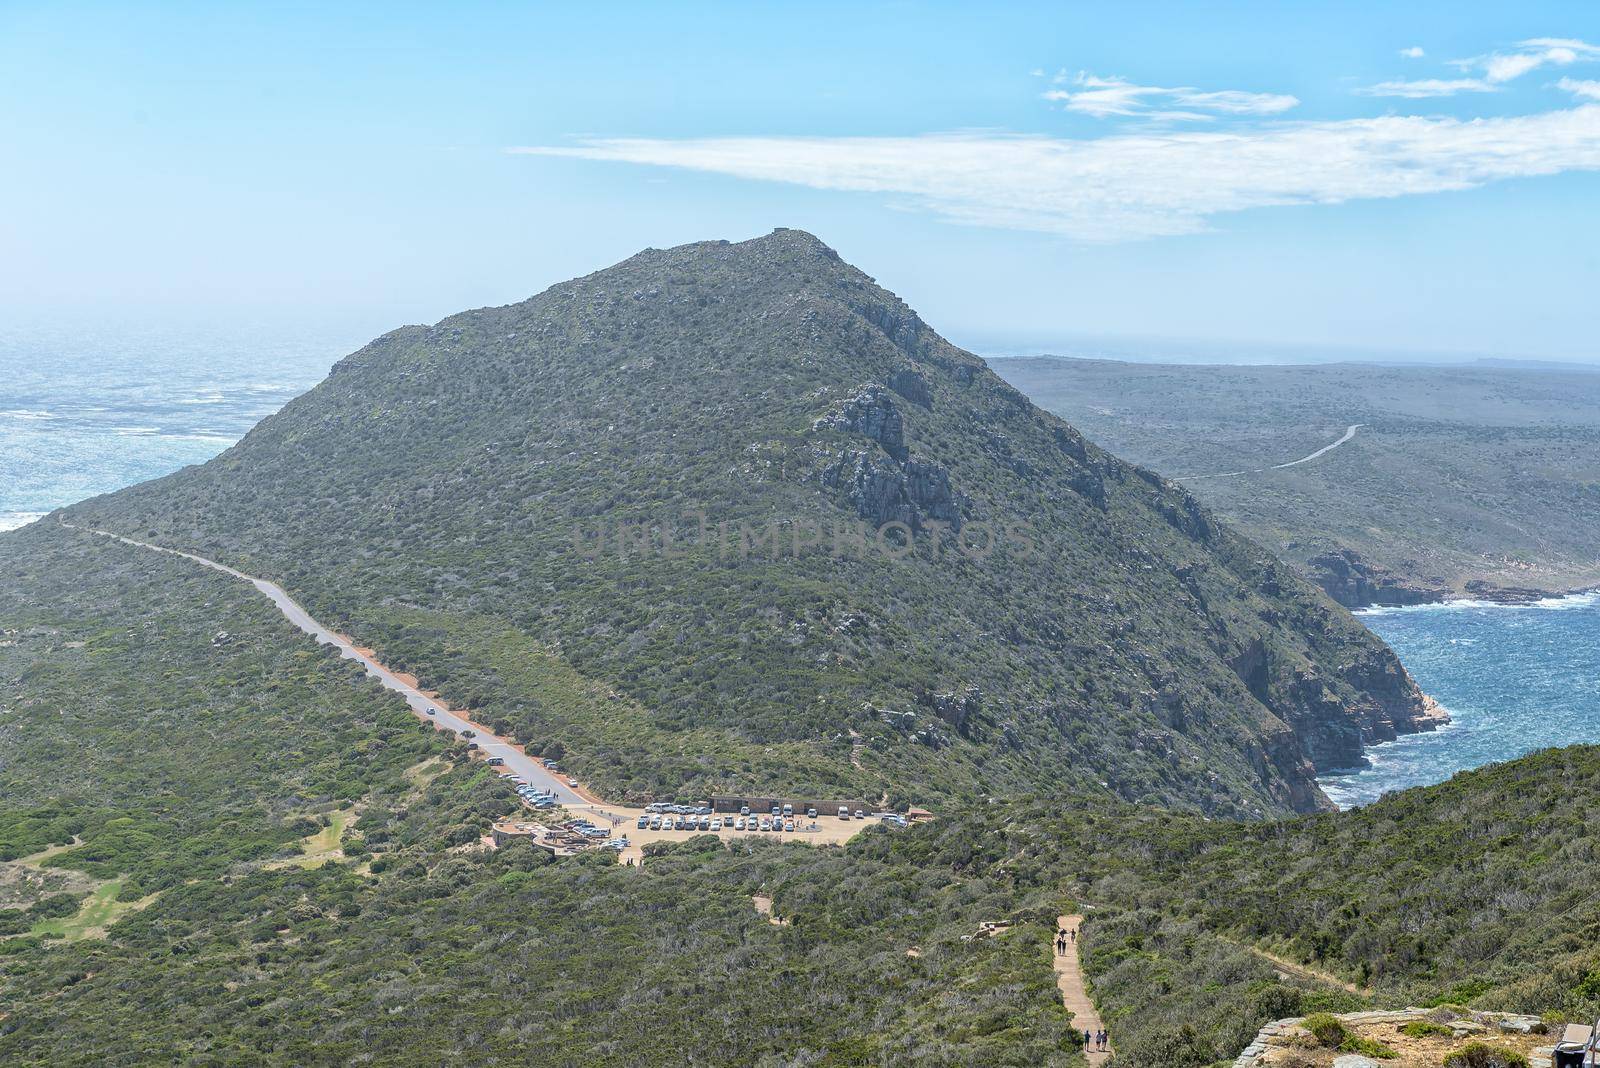 The parking area as seen from Cape Point. Vehicles and people are visible